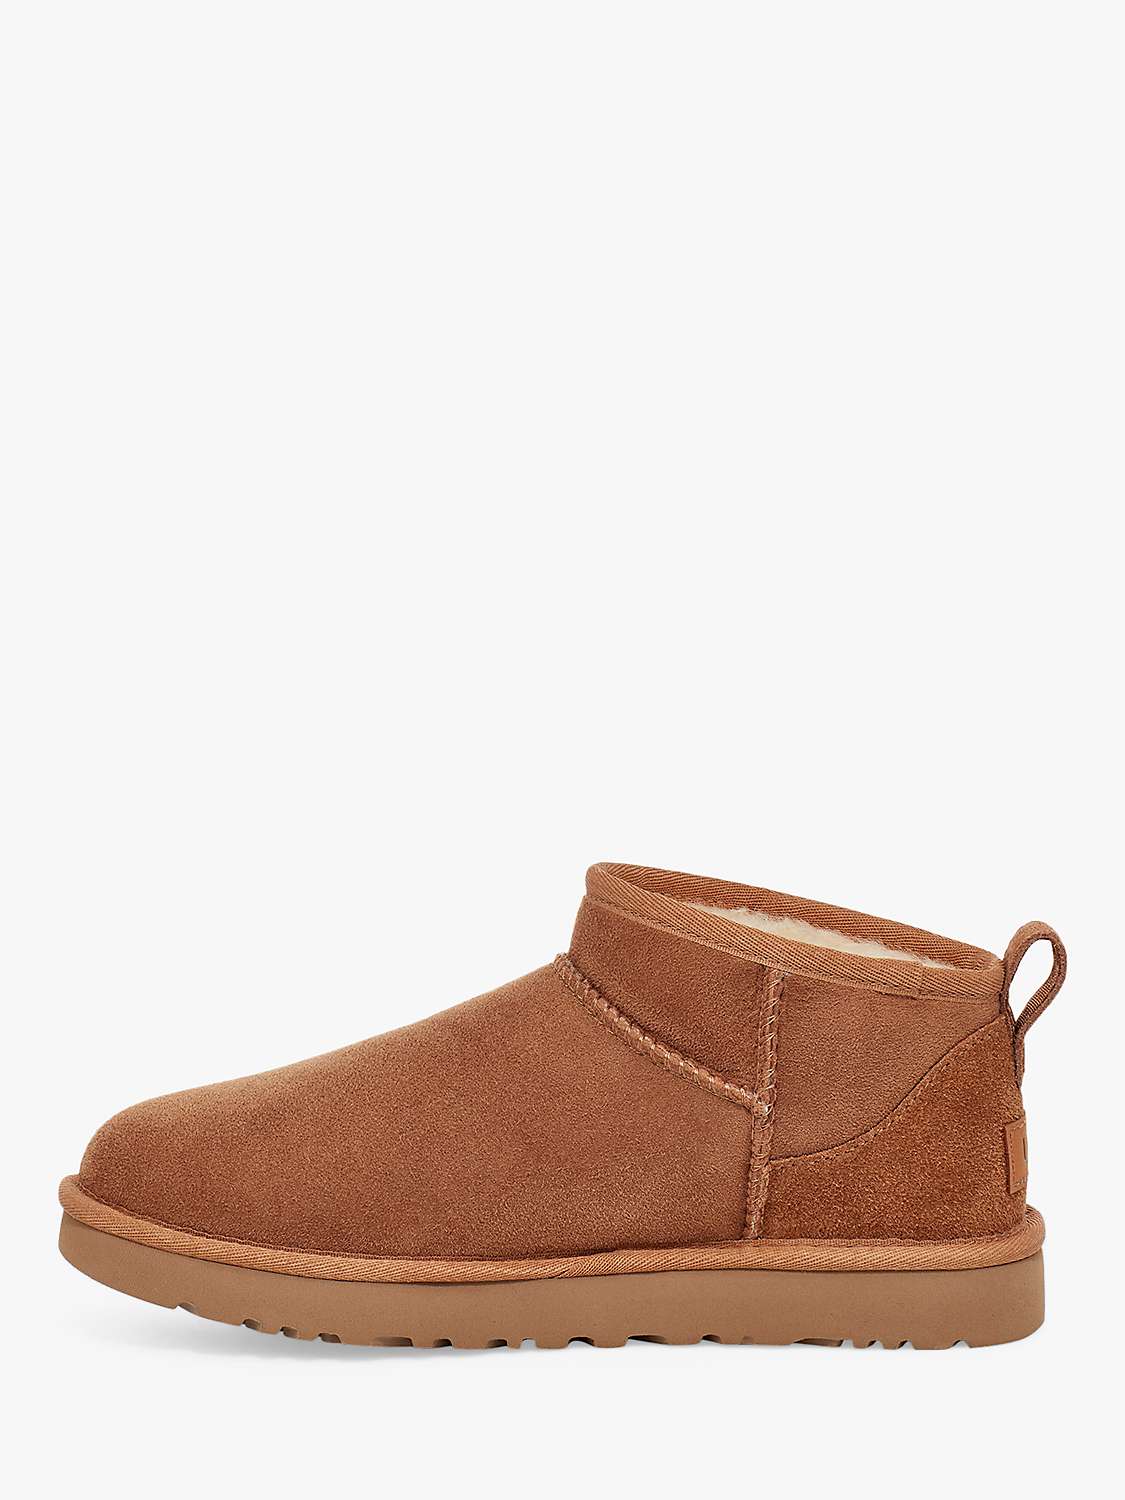 Buy UGG Classic Ultra Mini Sheepskin and Suede Ankle Boots Online at johnlewis.com